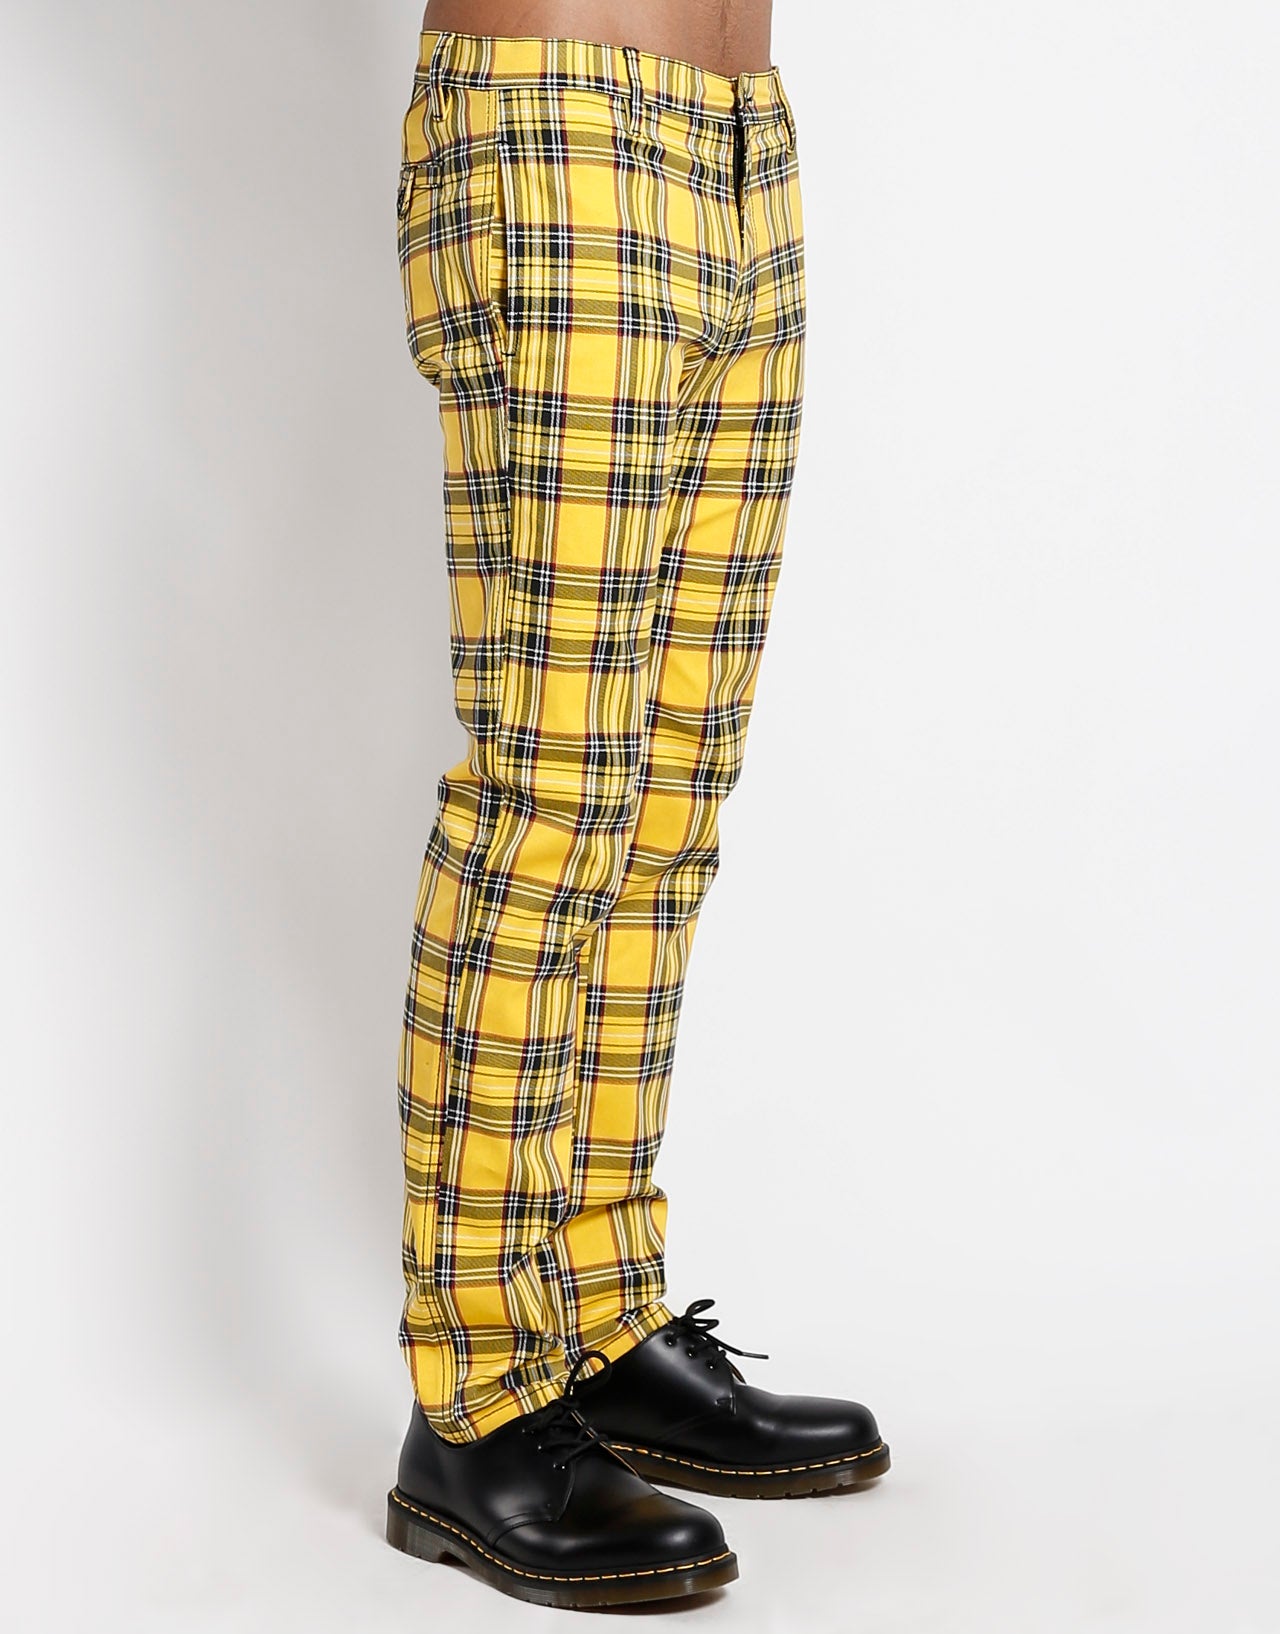 Wool Flannel Trousers  Green  Yellow Plaid P600  Mens Clothing  Traditional Natural shouldered clothing preppy apparel